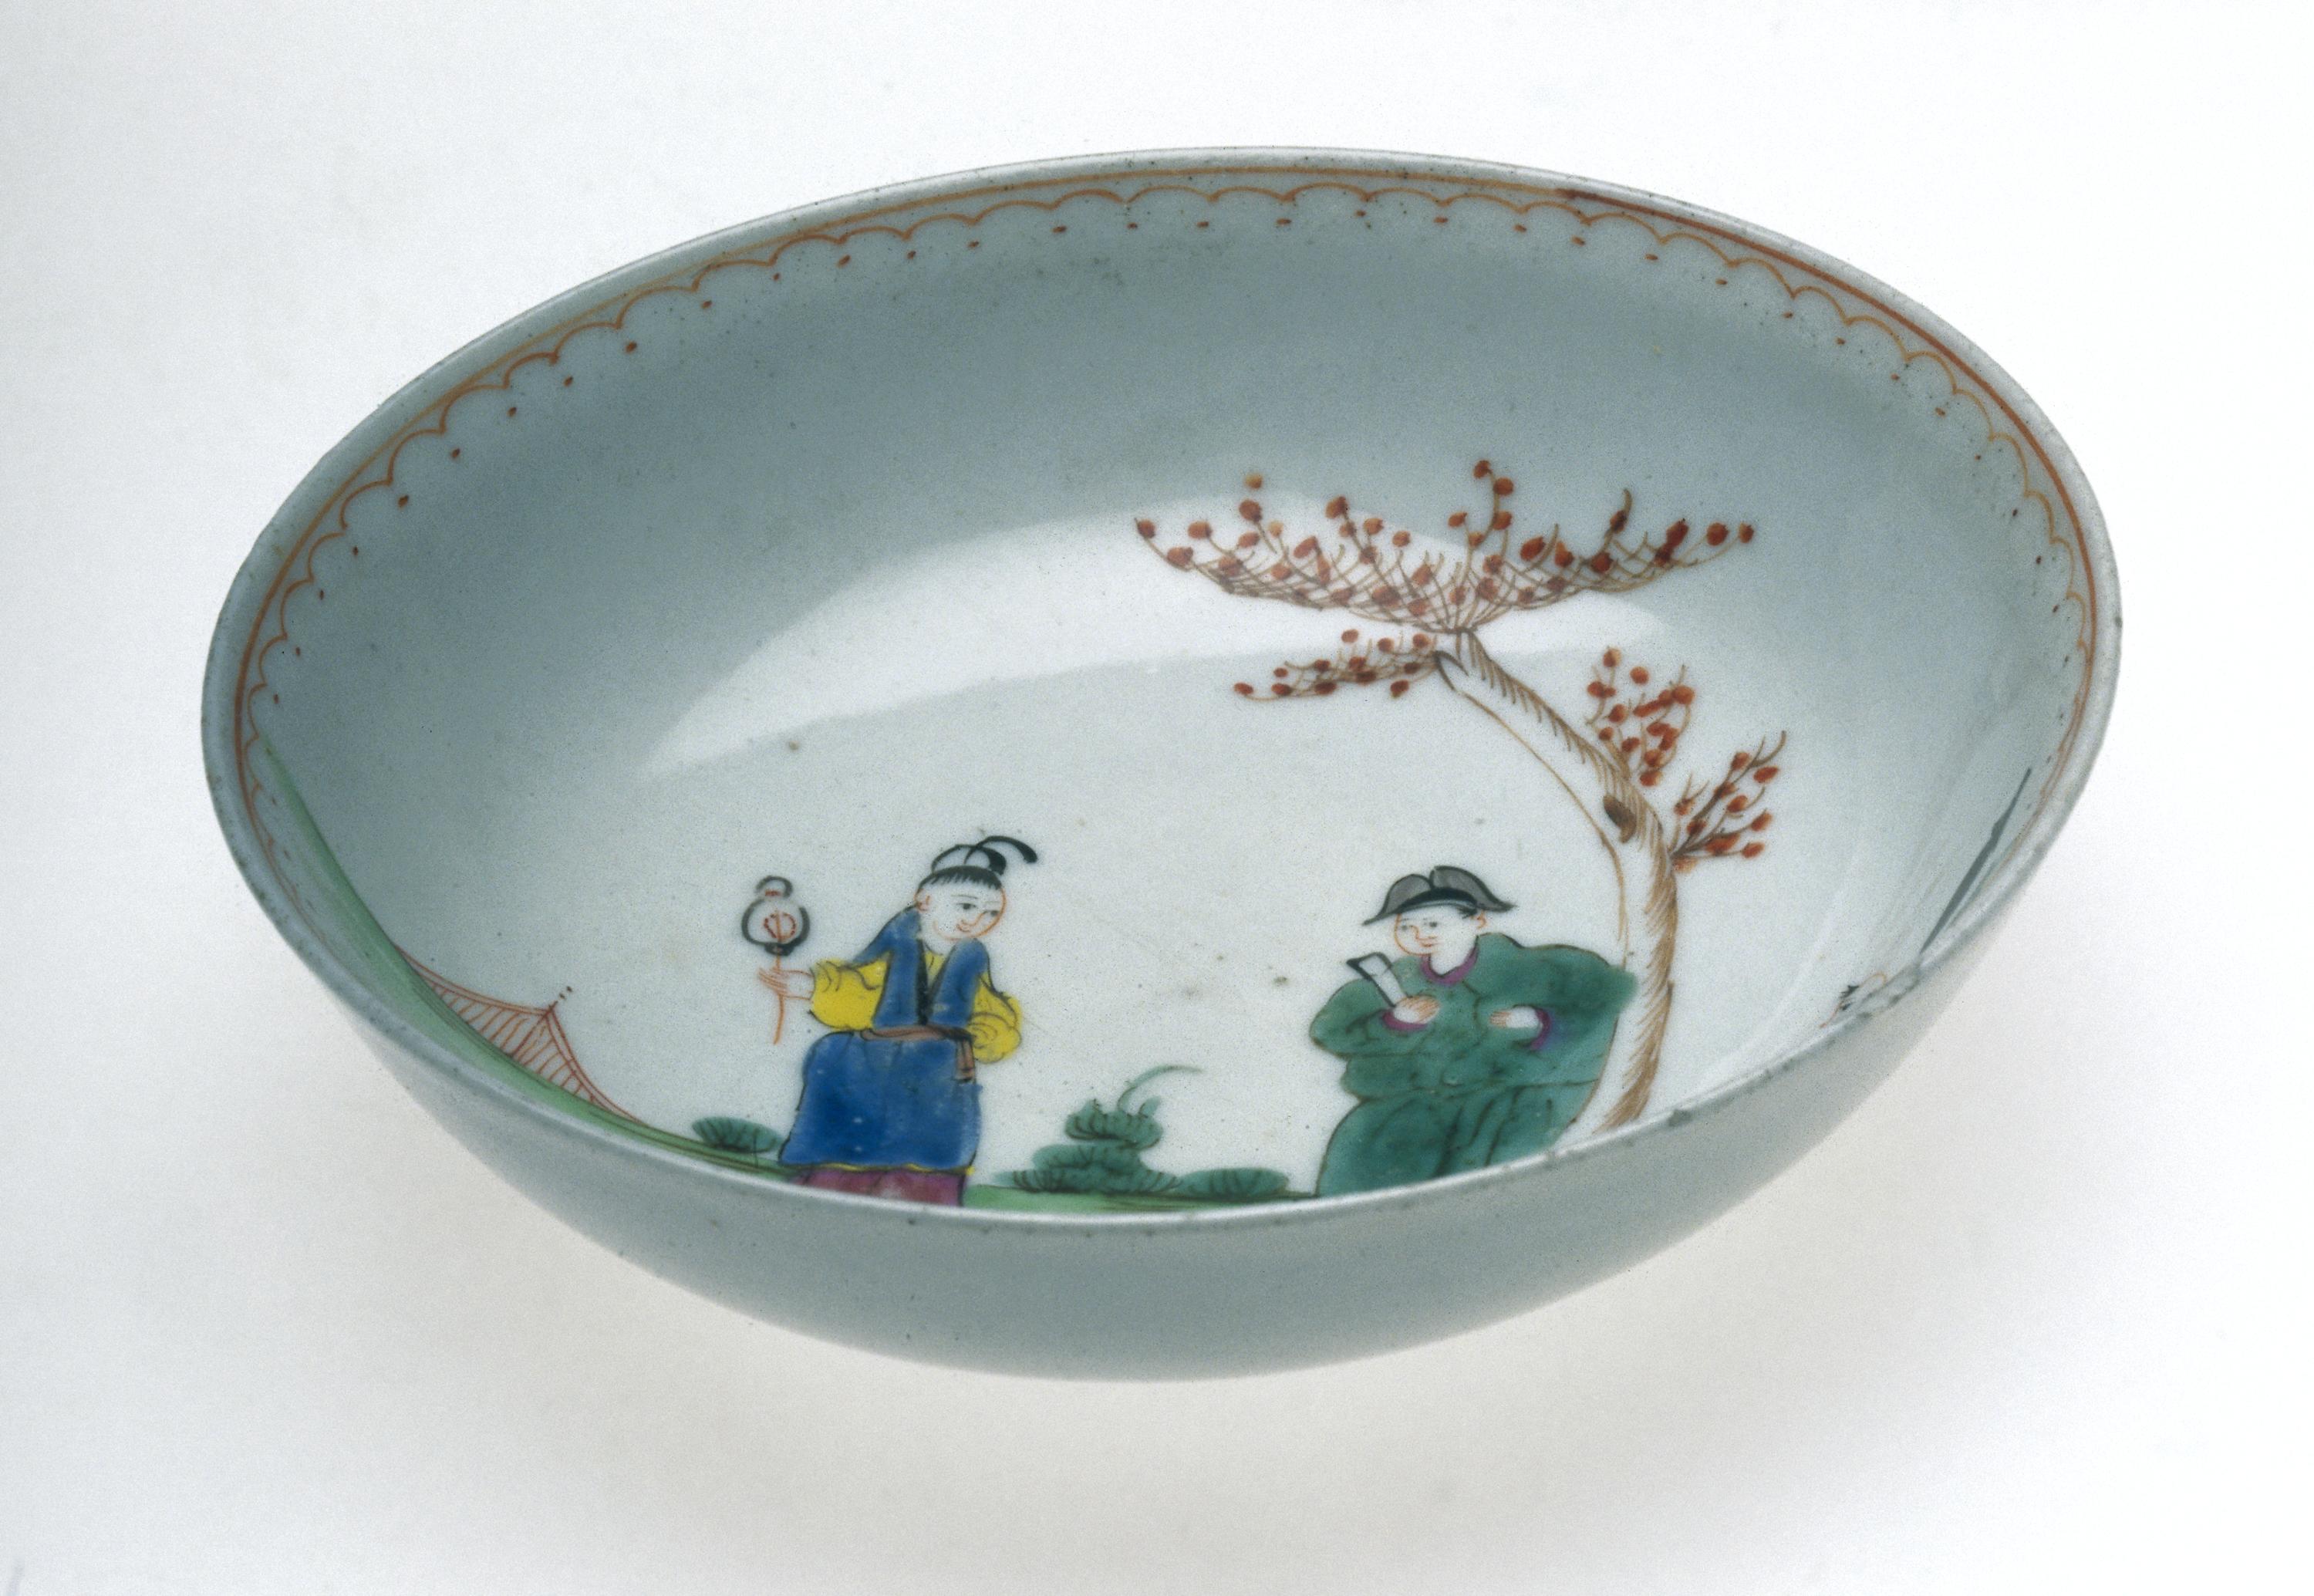 Porcelain saucer painted with Chinese figures and landscape